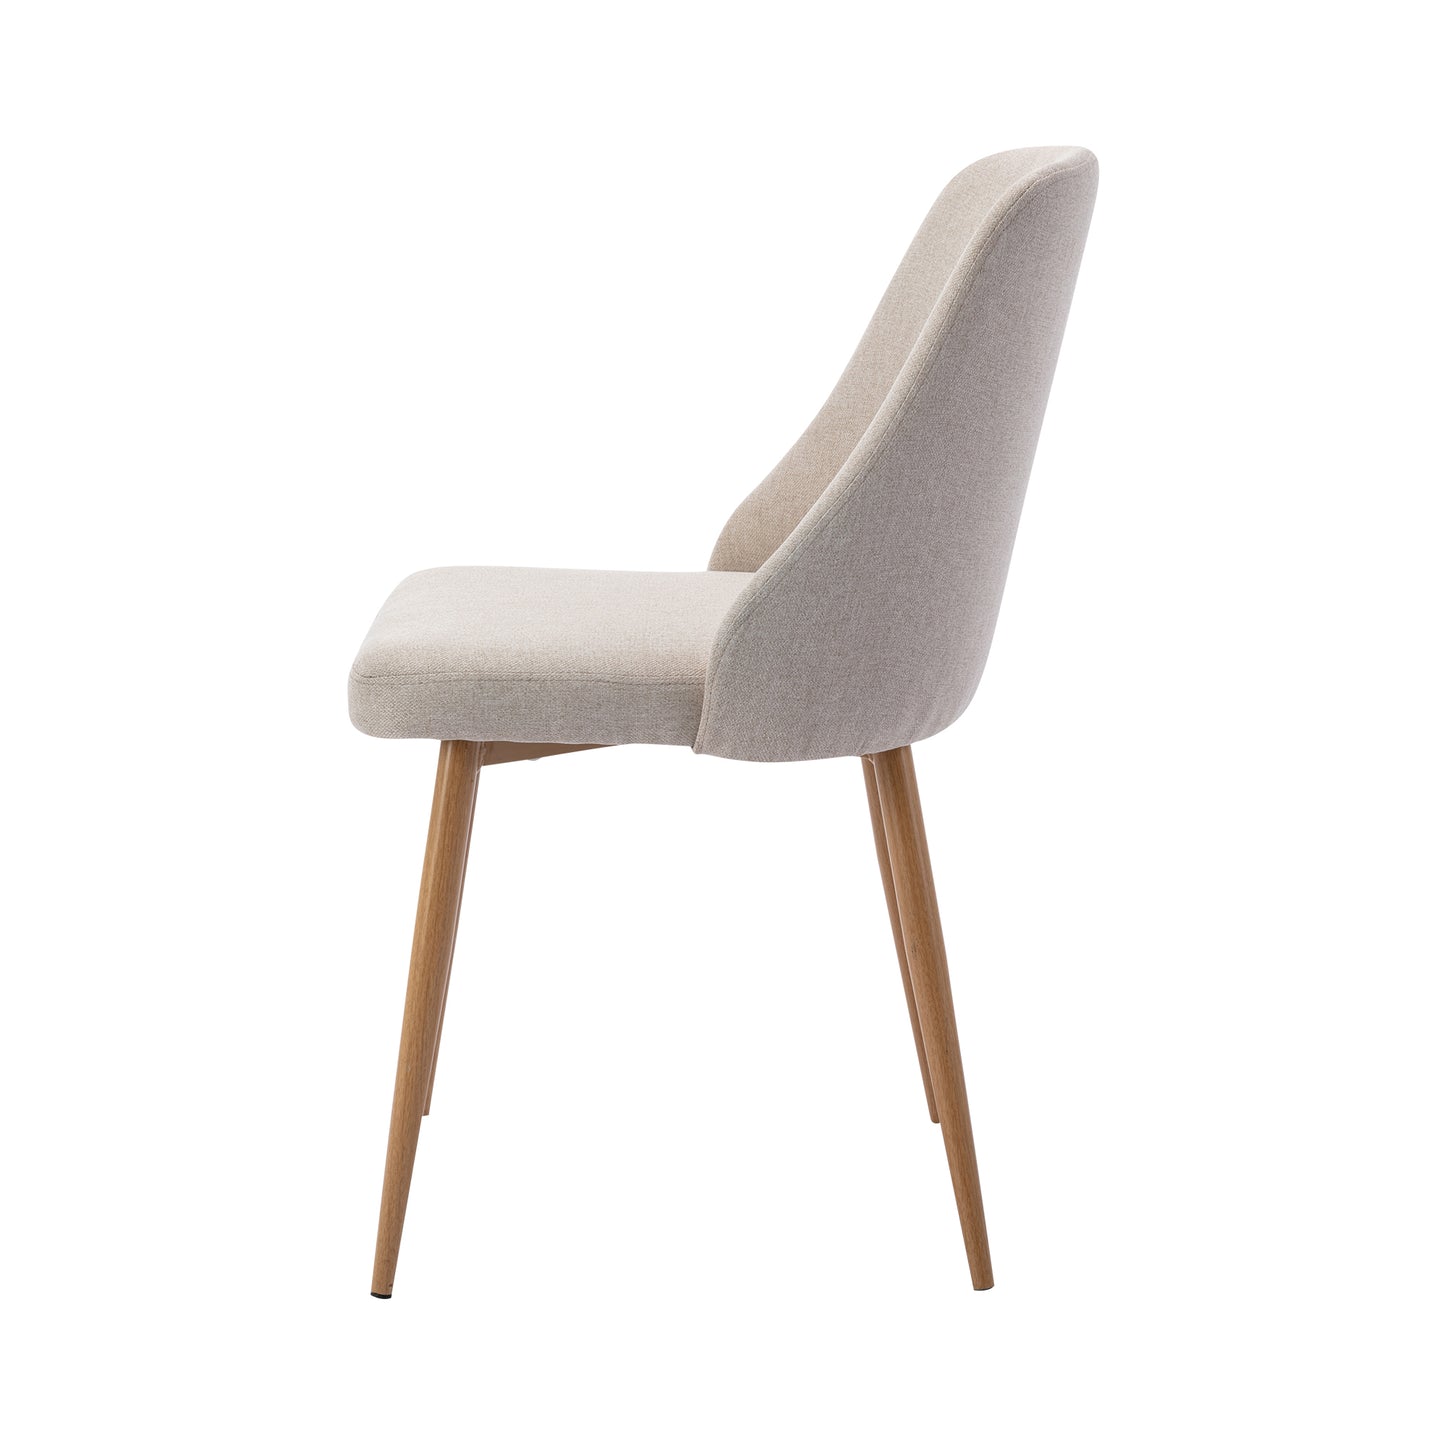 CHOTTO - Niko Dining Chairs - Beige (Set of 2)